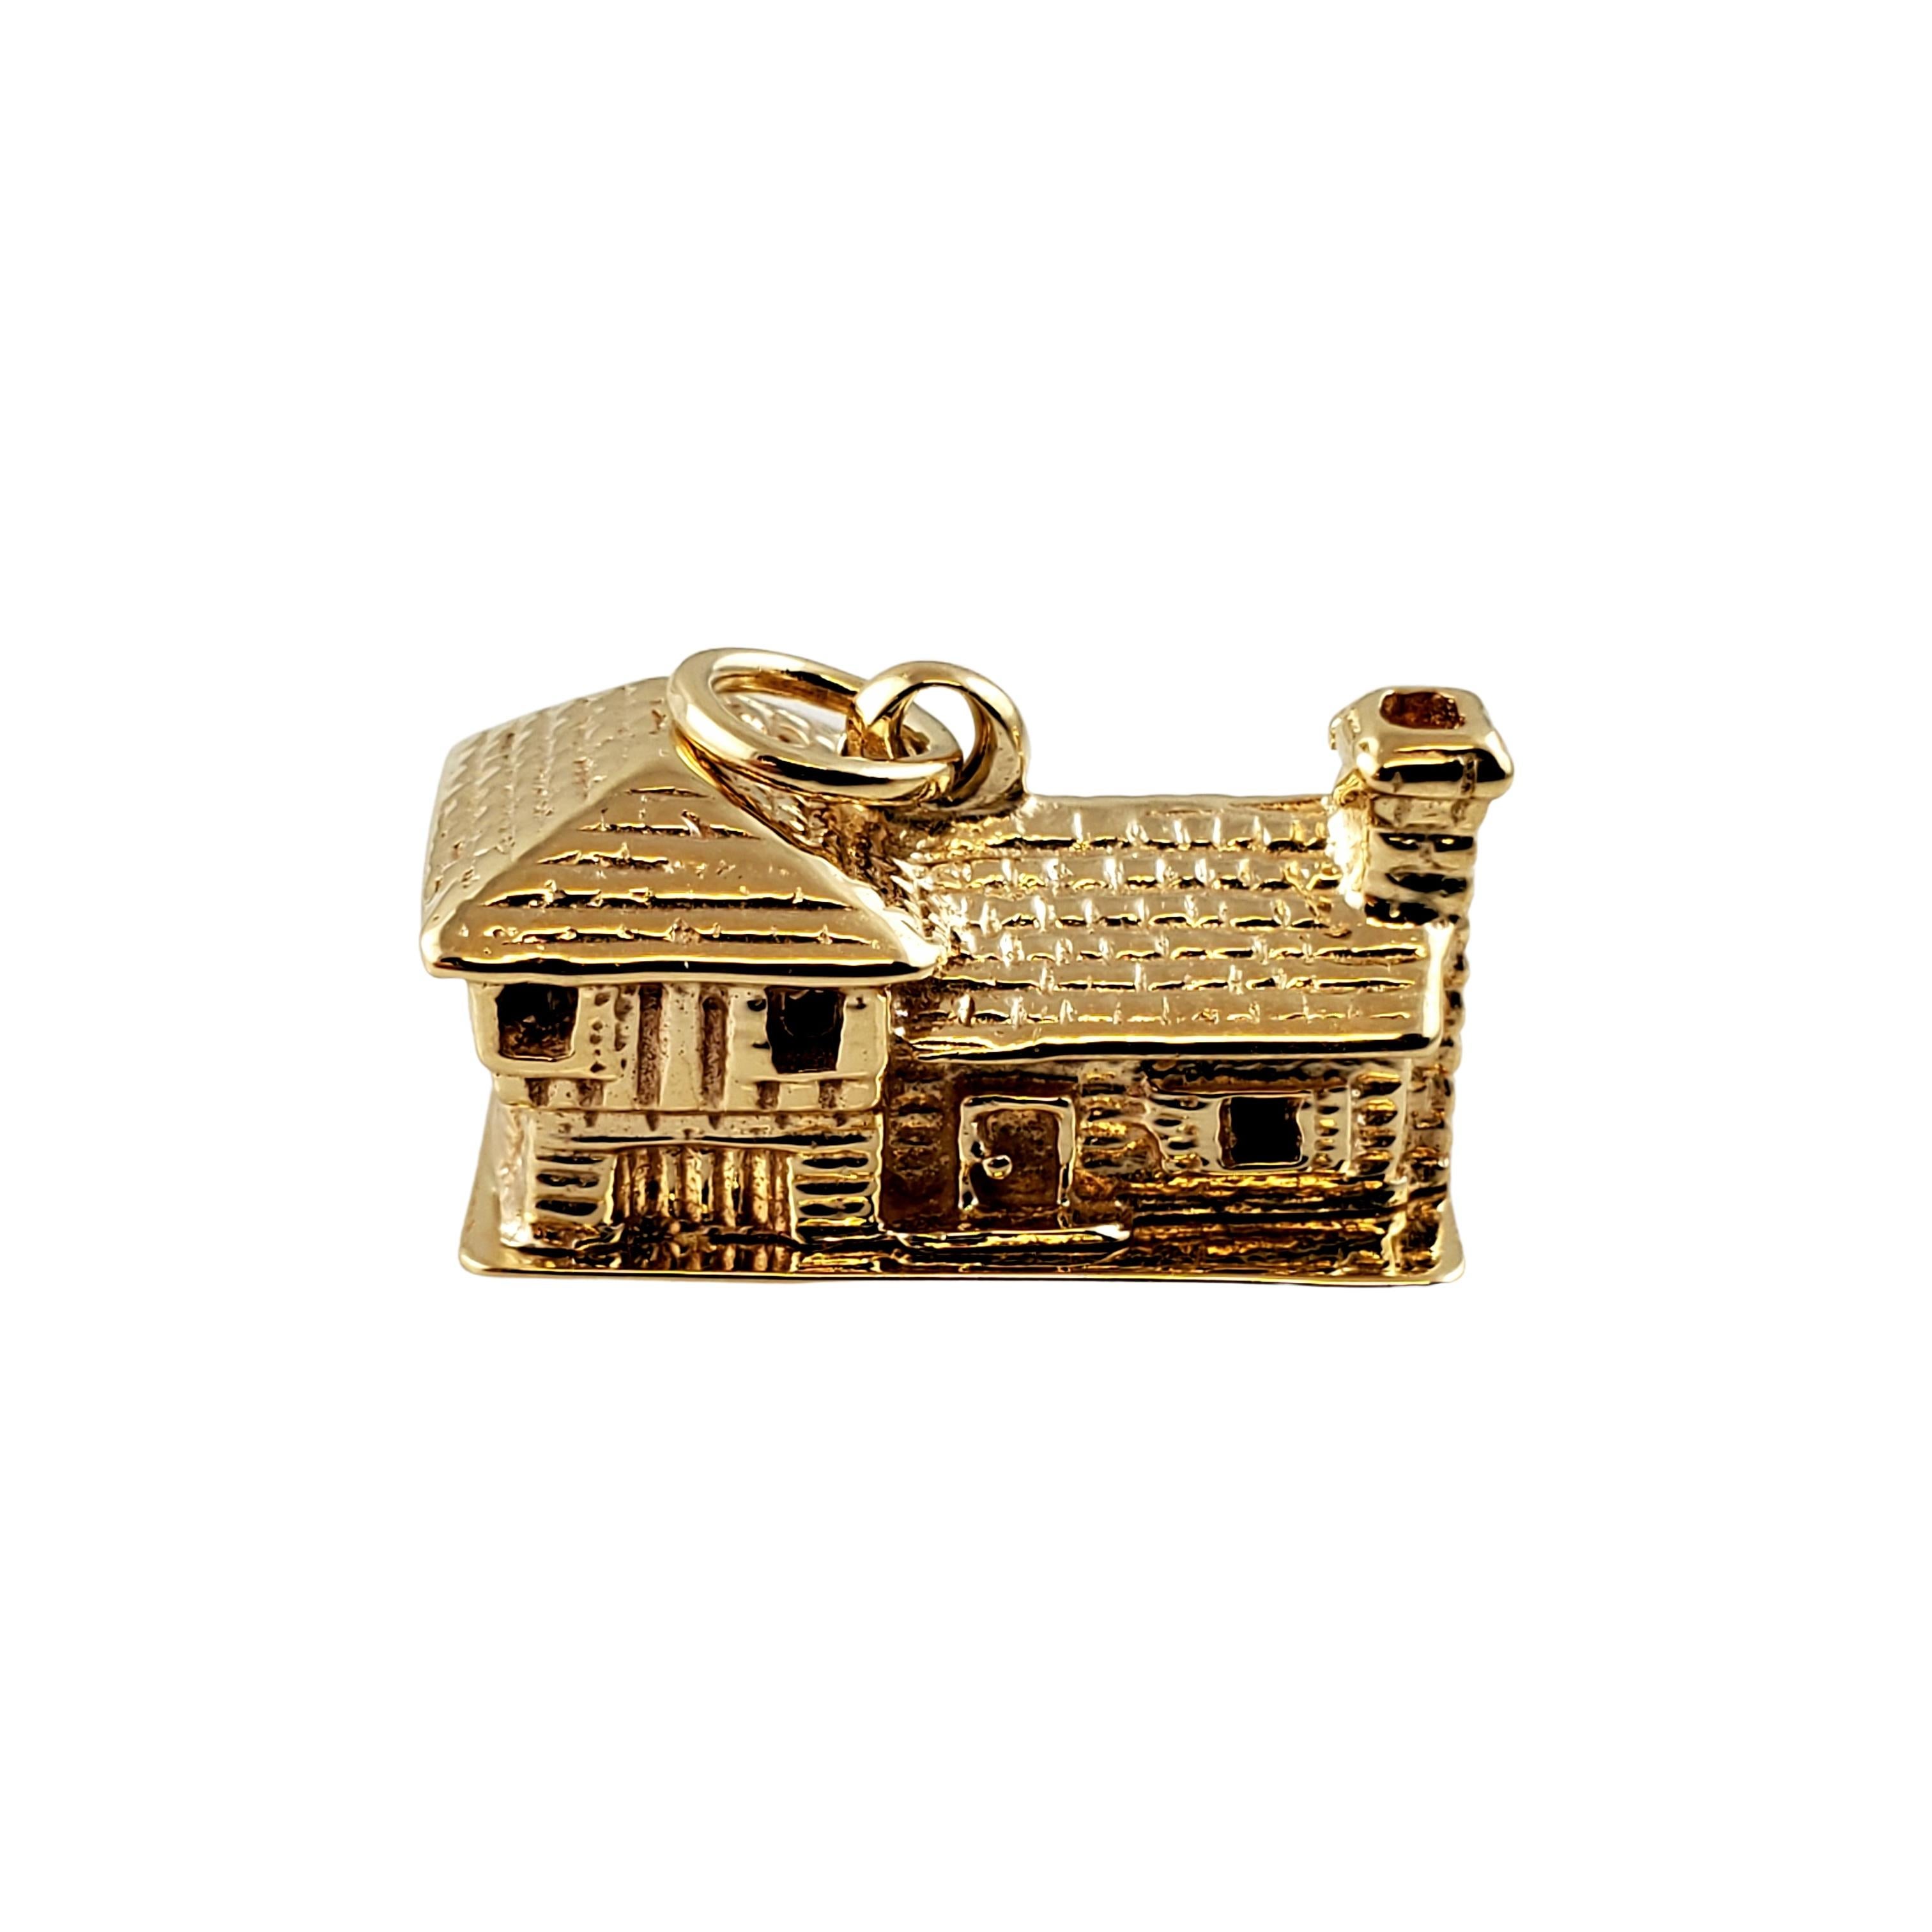 14K Yellow Gold House Charm

The perfect way to make a first time home buyers experience a little more special with this beautiful gift!

Beautiful 3D 14K yellow gold house charm, with small details such as open windows and brick carvings to really